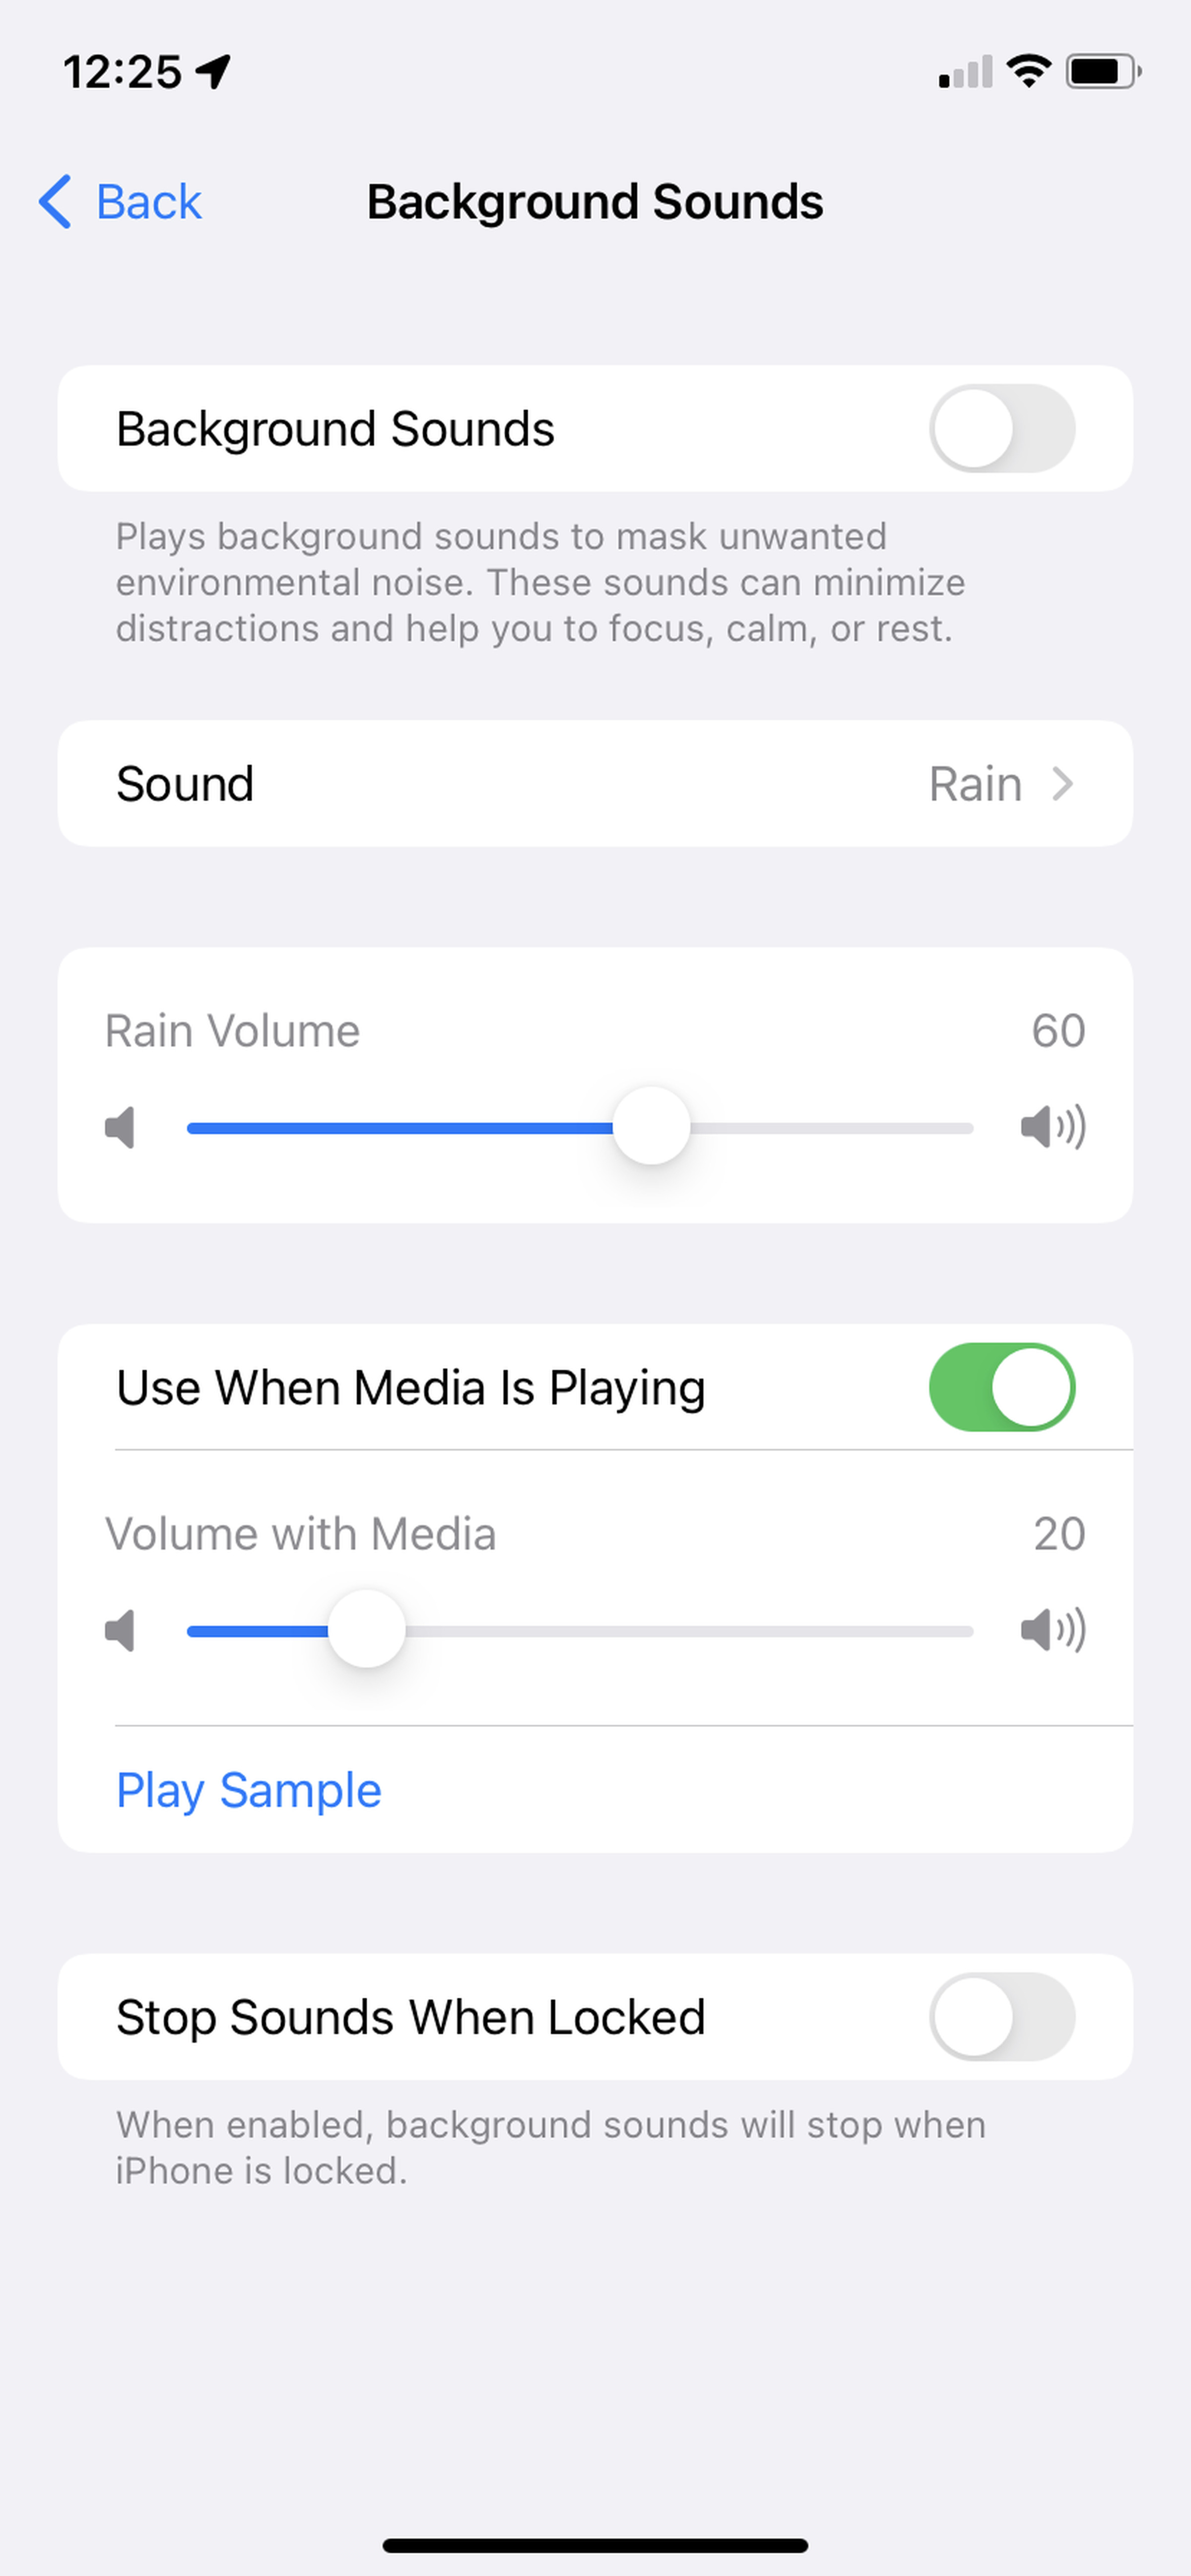 On the Background Sounds menu page, you can set your preferred sounds and adjust the volume.